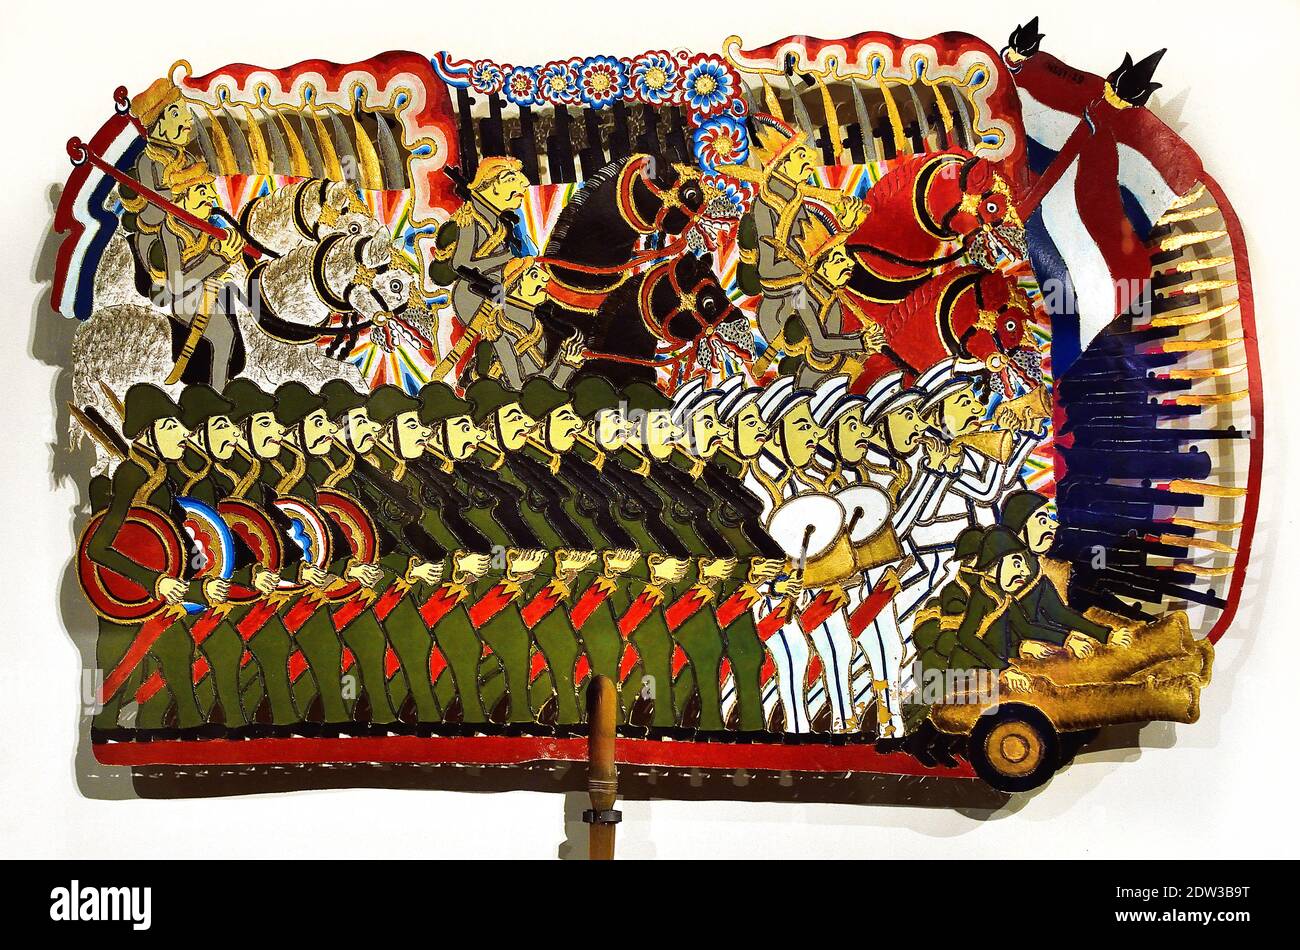 Wayang puppets of Dutch colonial army and Javanese during Java War, combatting armies, ( The Java War  or Diponegoro War  was fought in central Java from 1825 – 1830, between the colonial Dutch Empire and native Javanese rebels. )  Wayang theater from Indonesia and Malaysia. puppet and shadow play, dance and mask play, theater and performance art Stock Photo